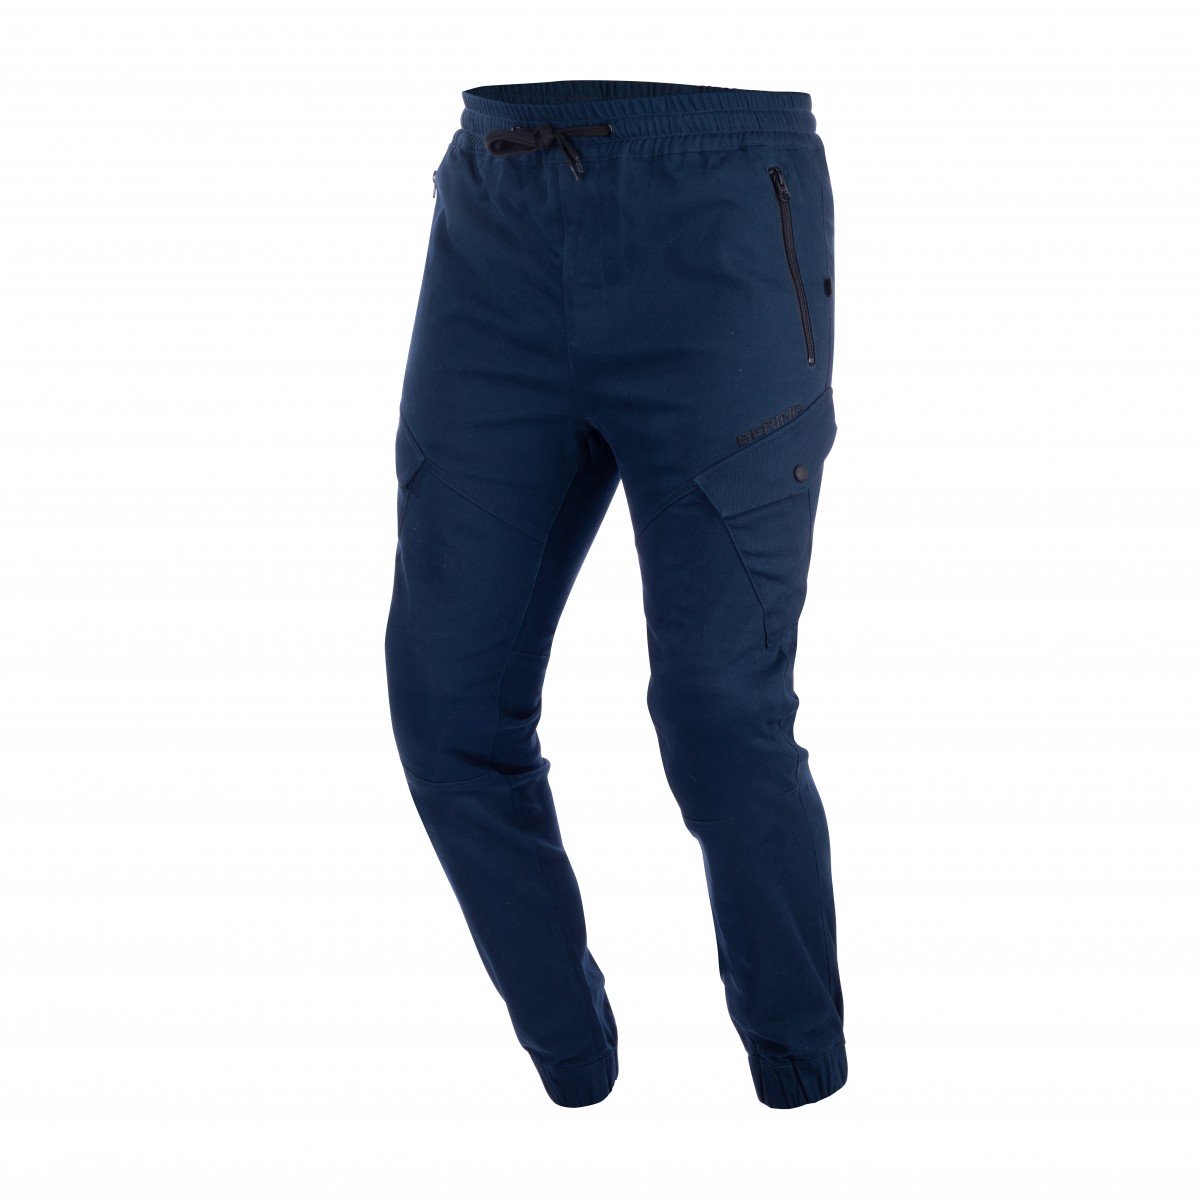 Image of Bering Trousers Richie Navy Blue Size L ID 3660815167786